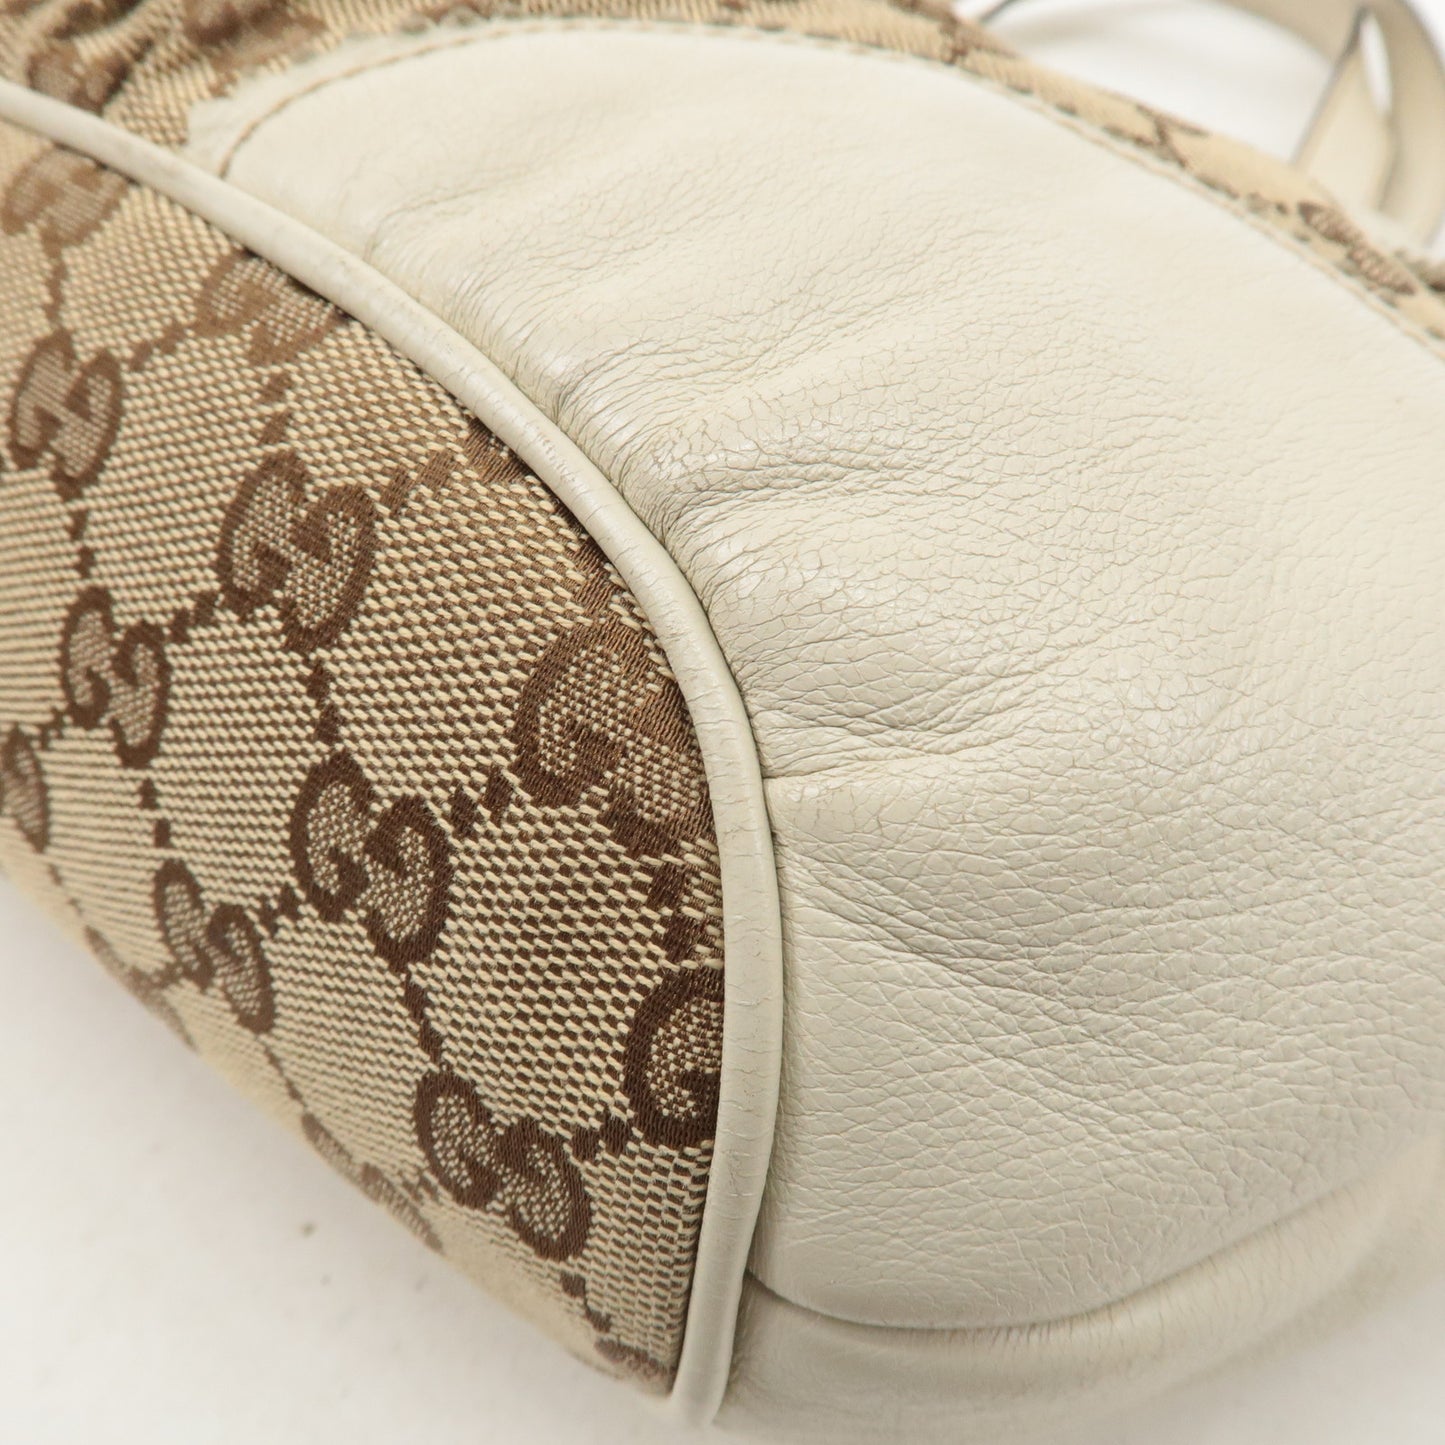 GUCCI GG Canvas Leather Crest Hand Bag Beige Brown 211955